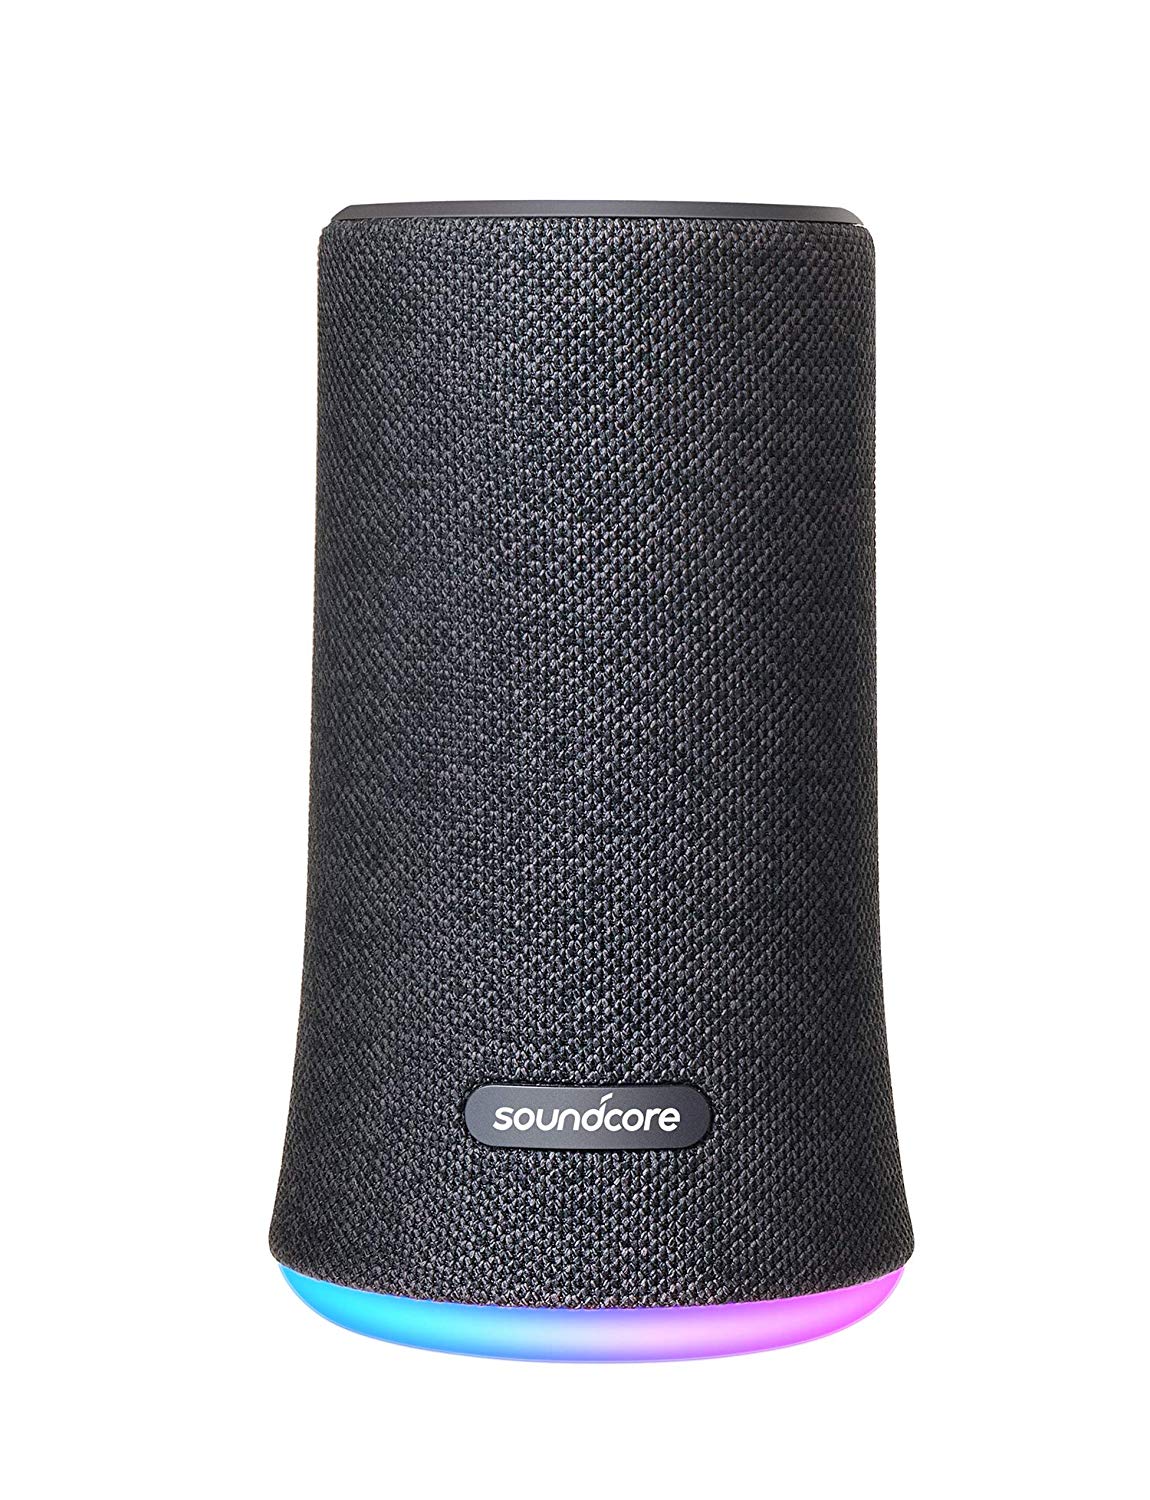 Anker Soundcore Flare product image